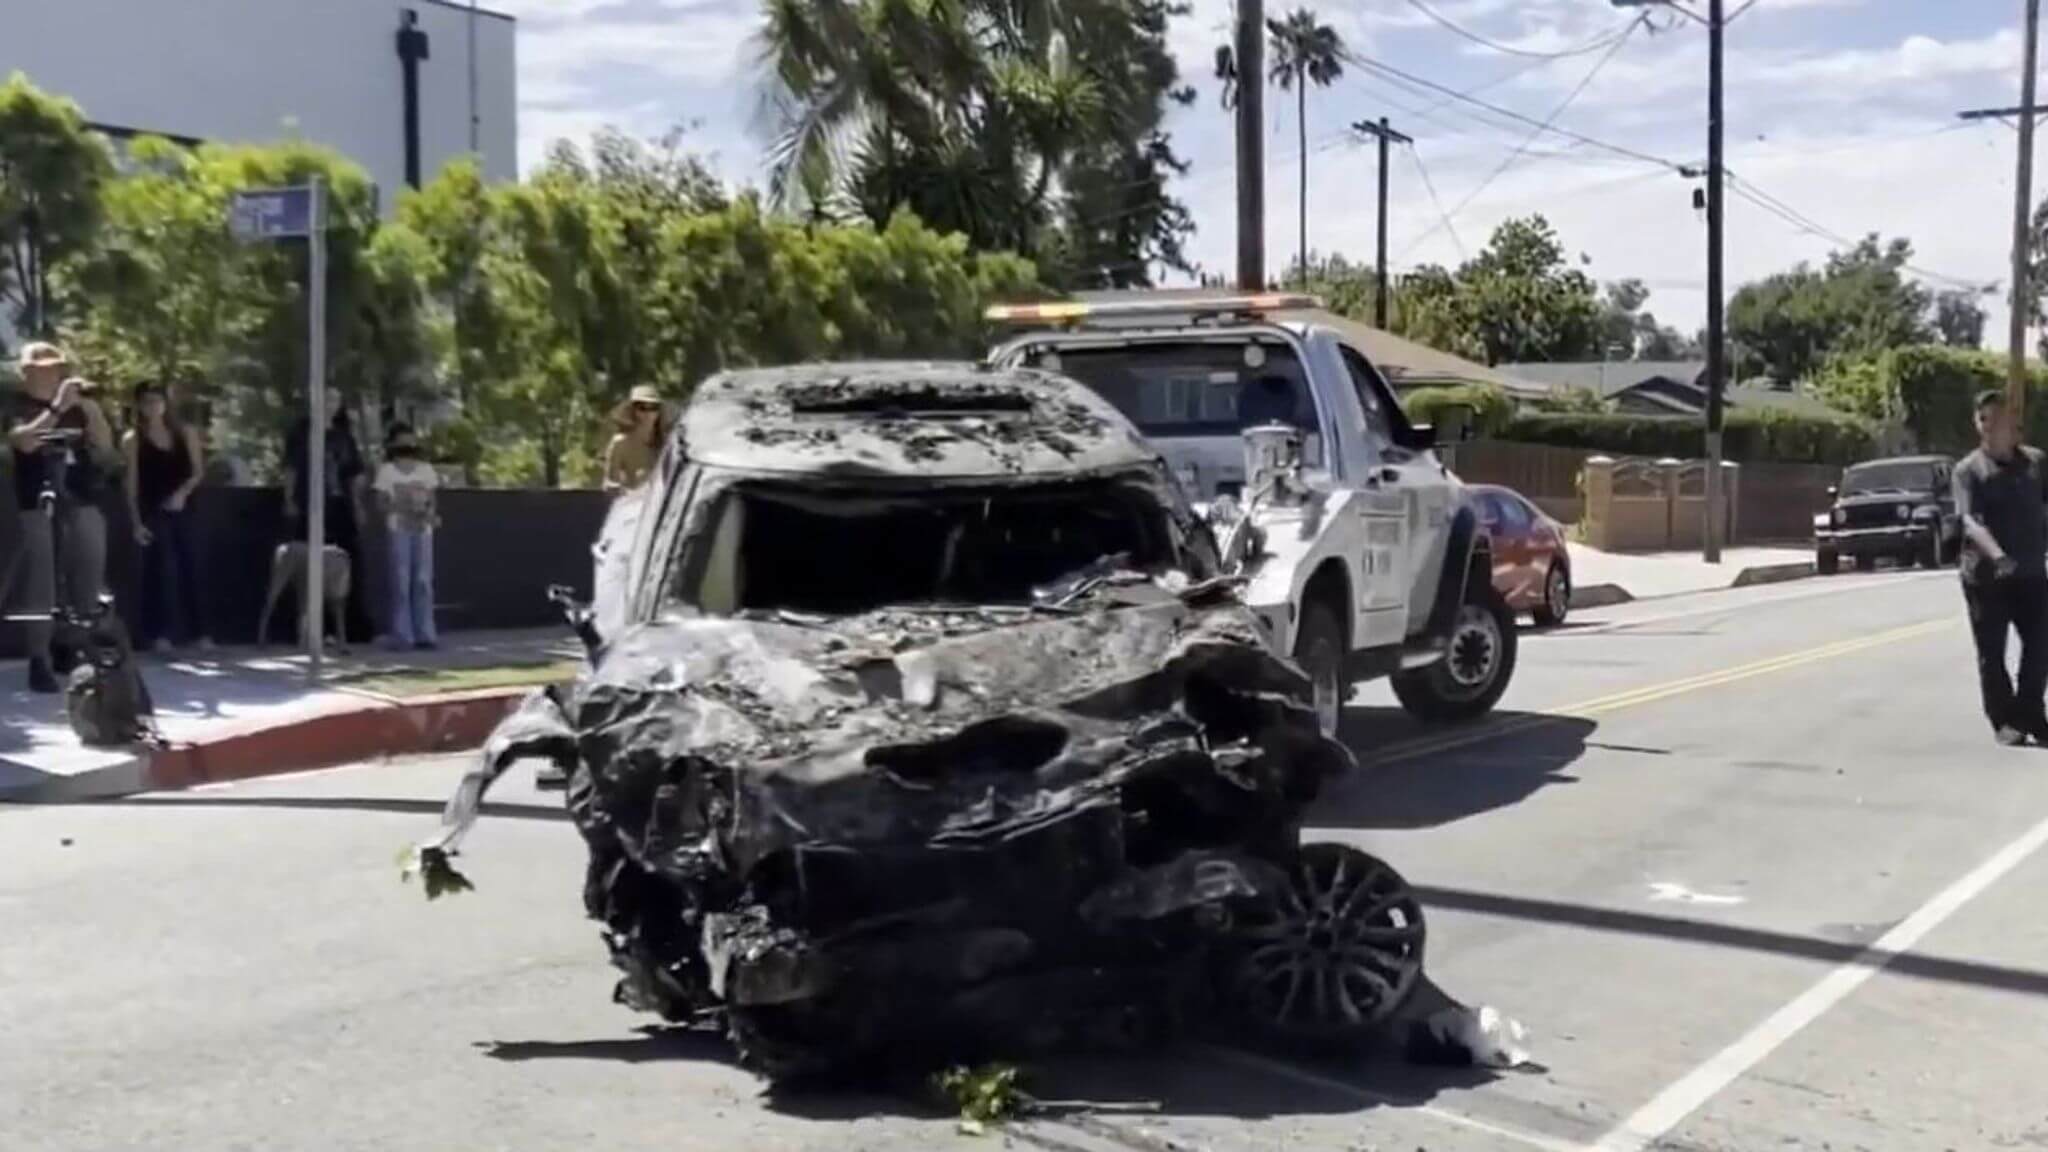 Anne Heche's car after the accident